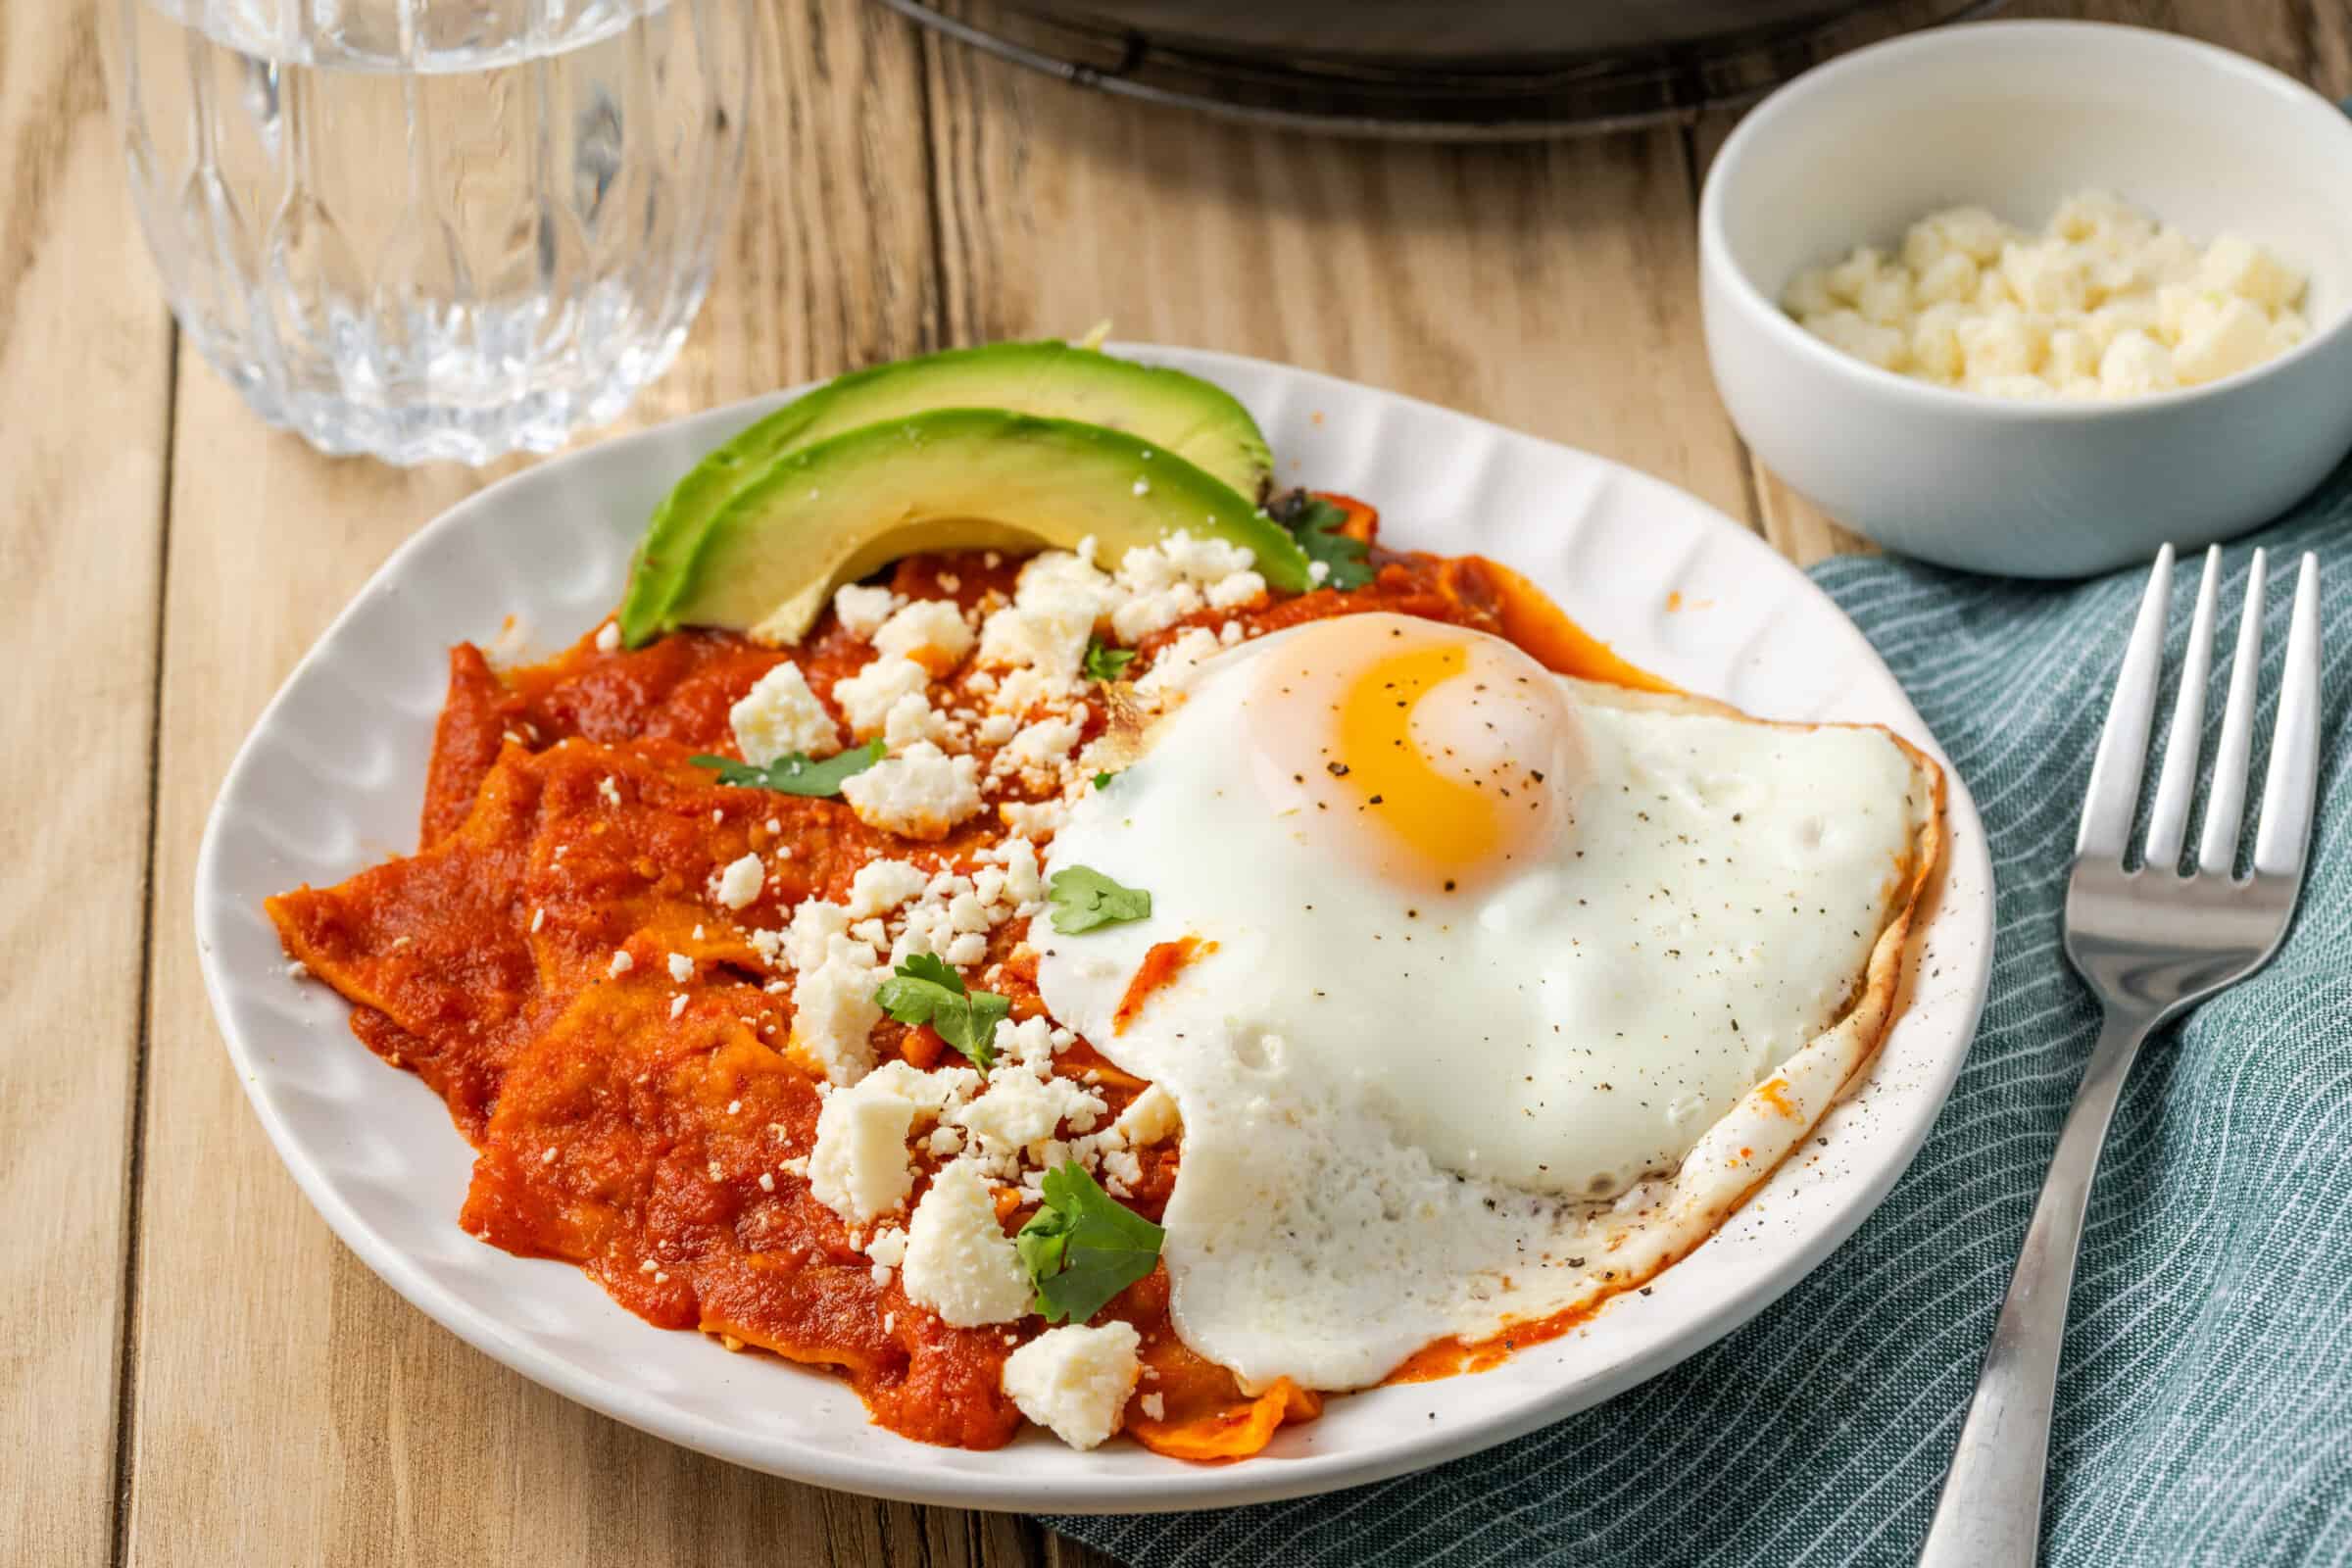 Chilaquiles rojos are shown on a plate with avocado and fried eggs.